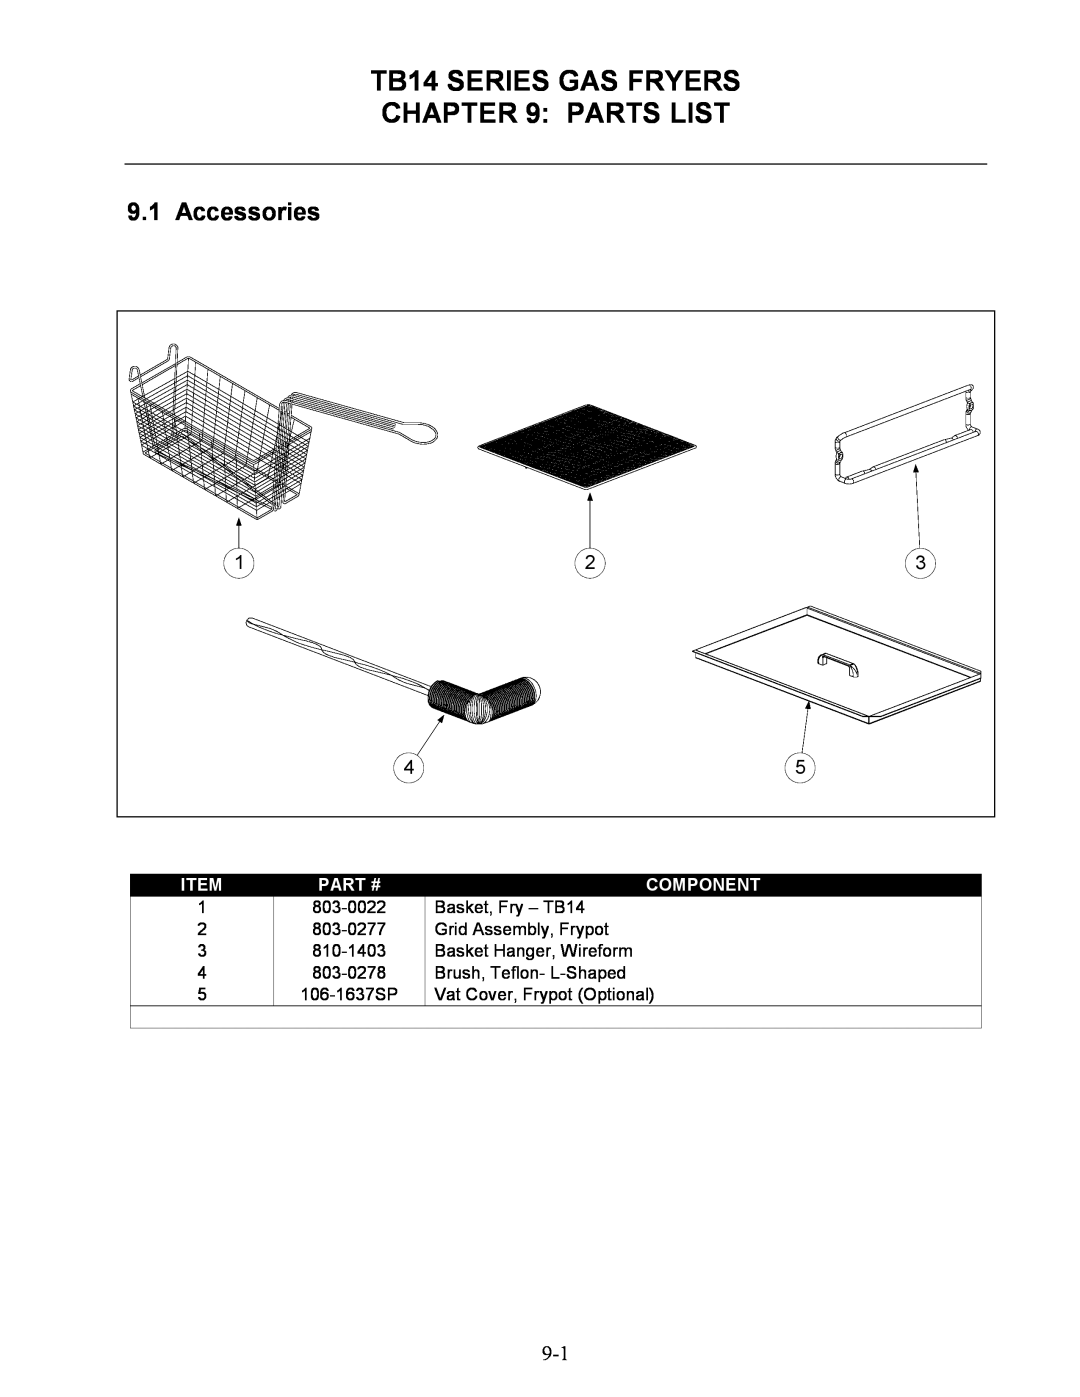 Frymaster operation manual TB14 SERIES GAS FRYERS PARTS LIST, Accessories, Part #, Component 